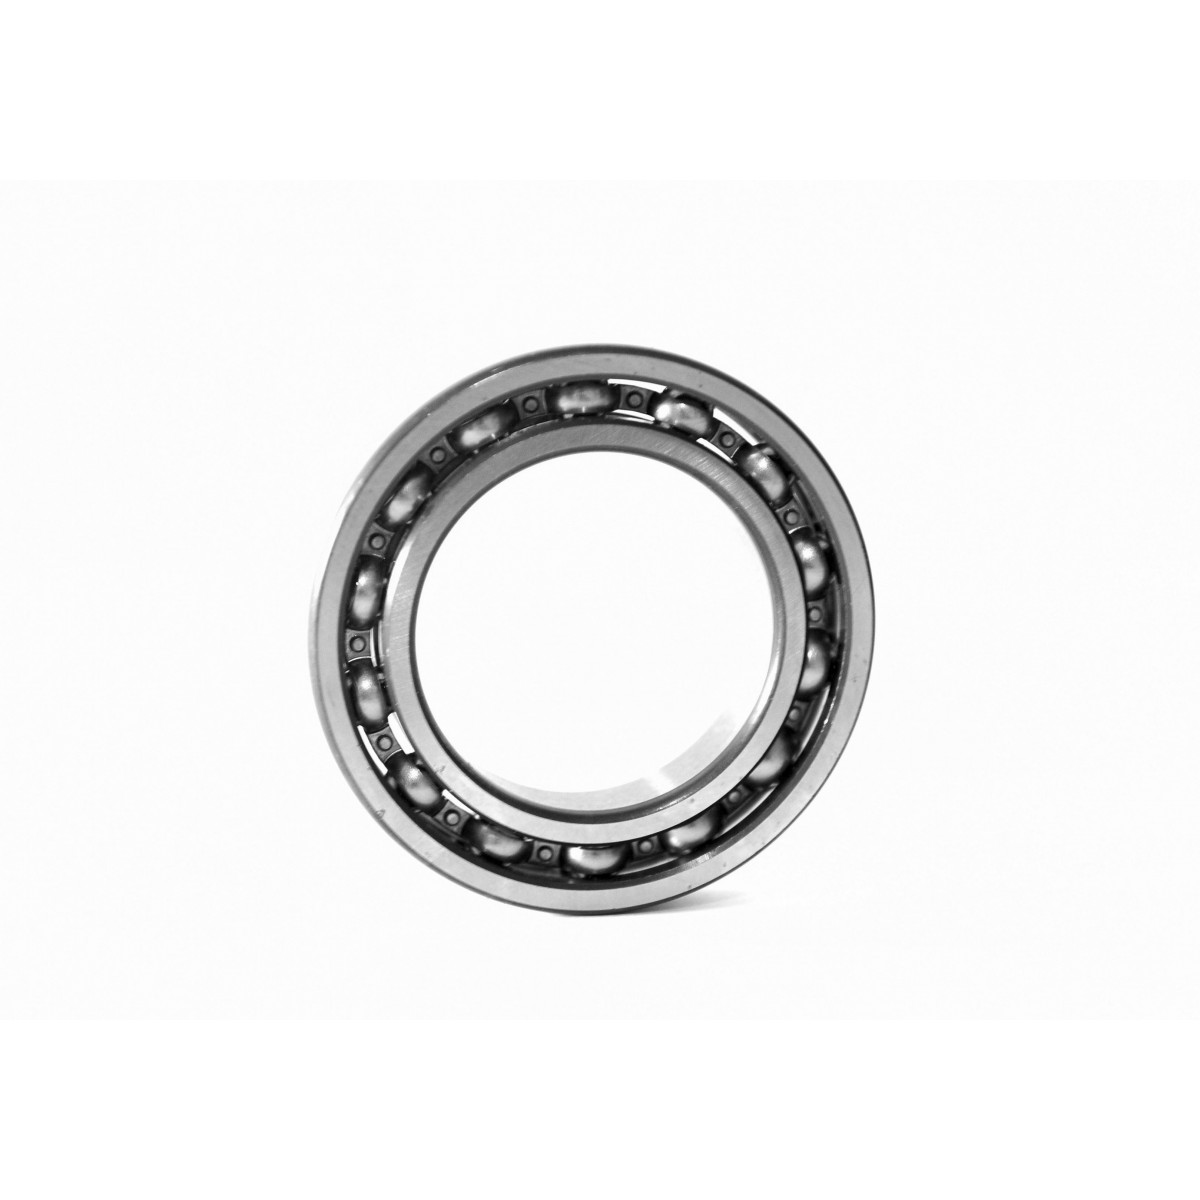 Bearing for Mitsubishi VST MT180/222/270 gearbox